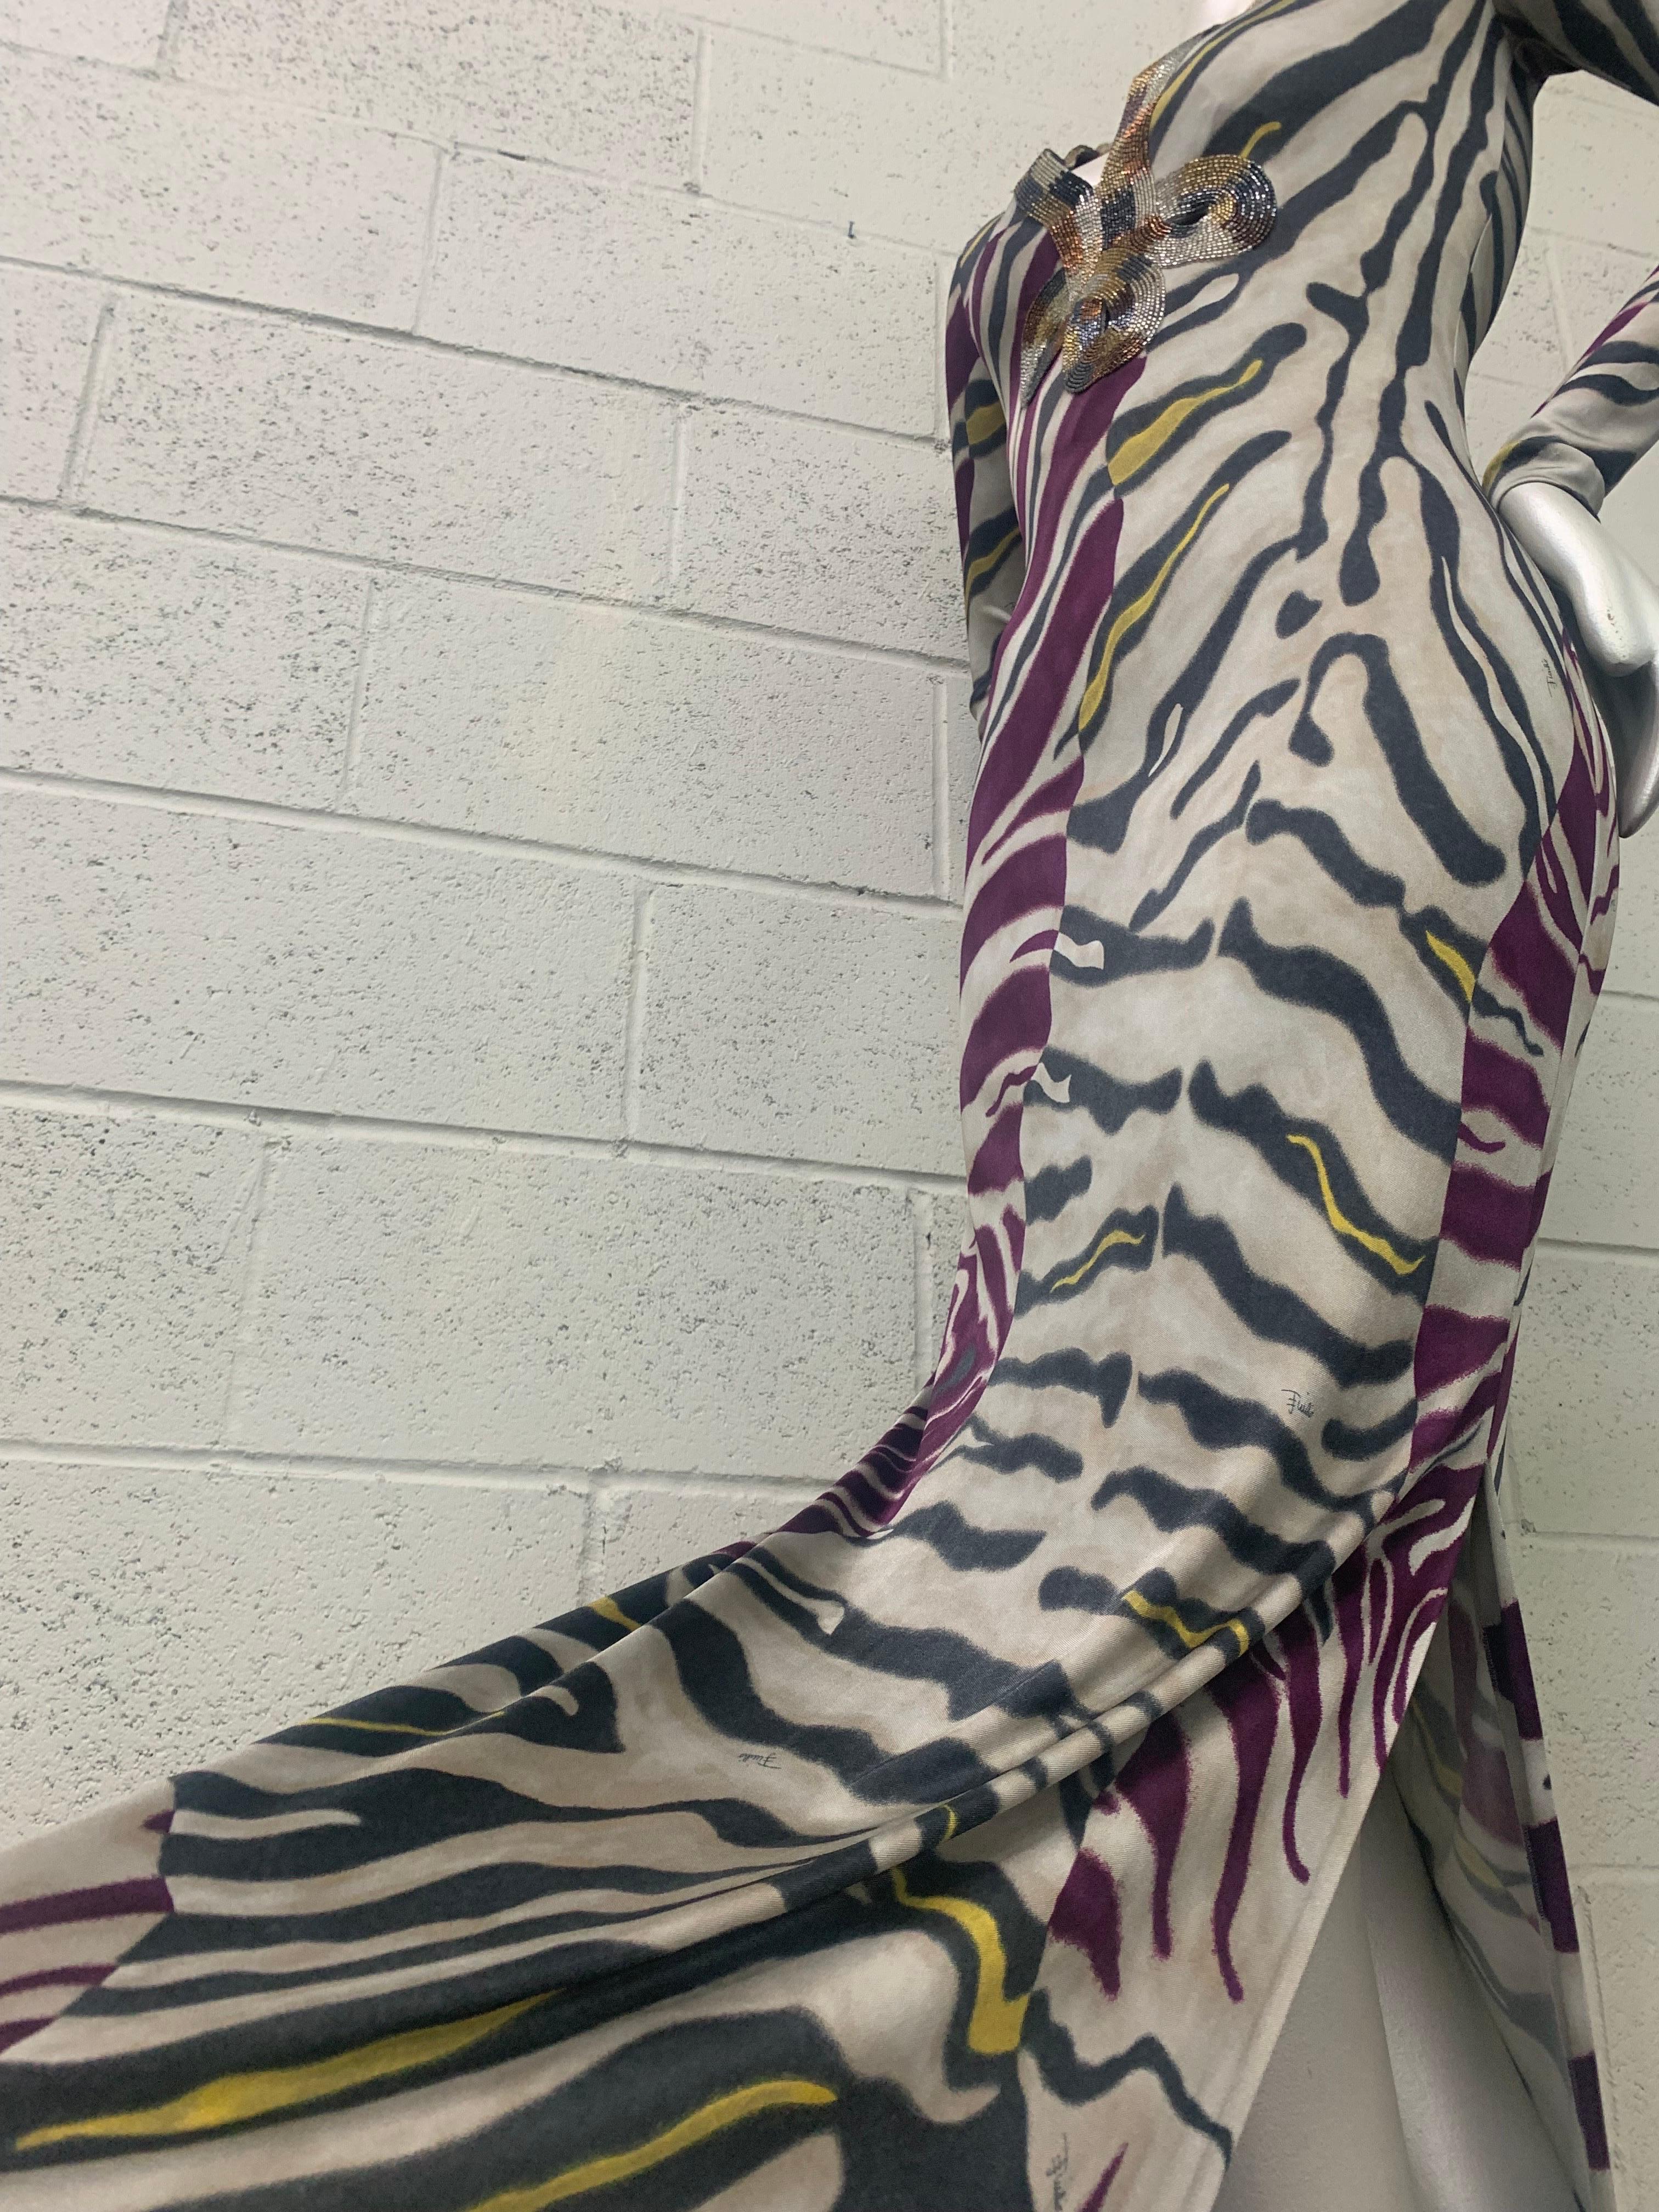 Emilio Pucci Stylized Zebra-Print Body-Conscious Beaded Maxi Dress in Rayon Knit For Sale 8